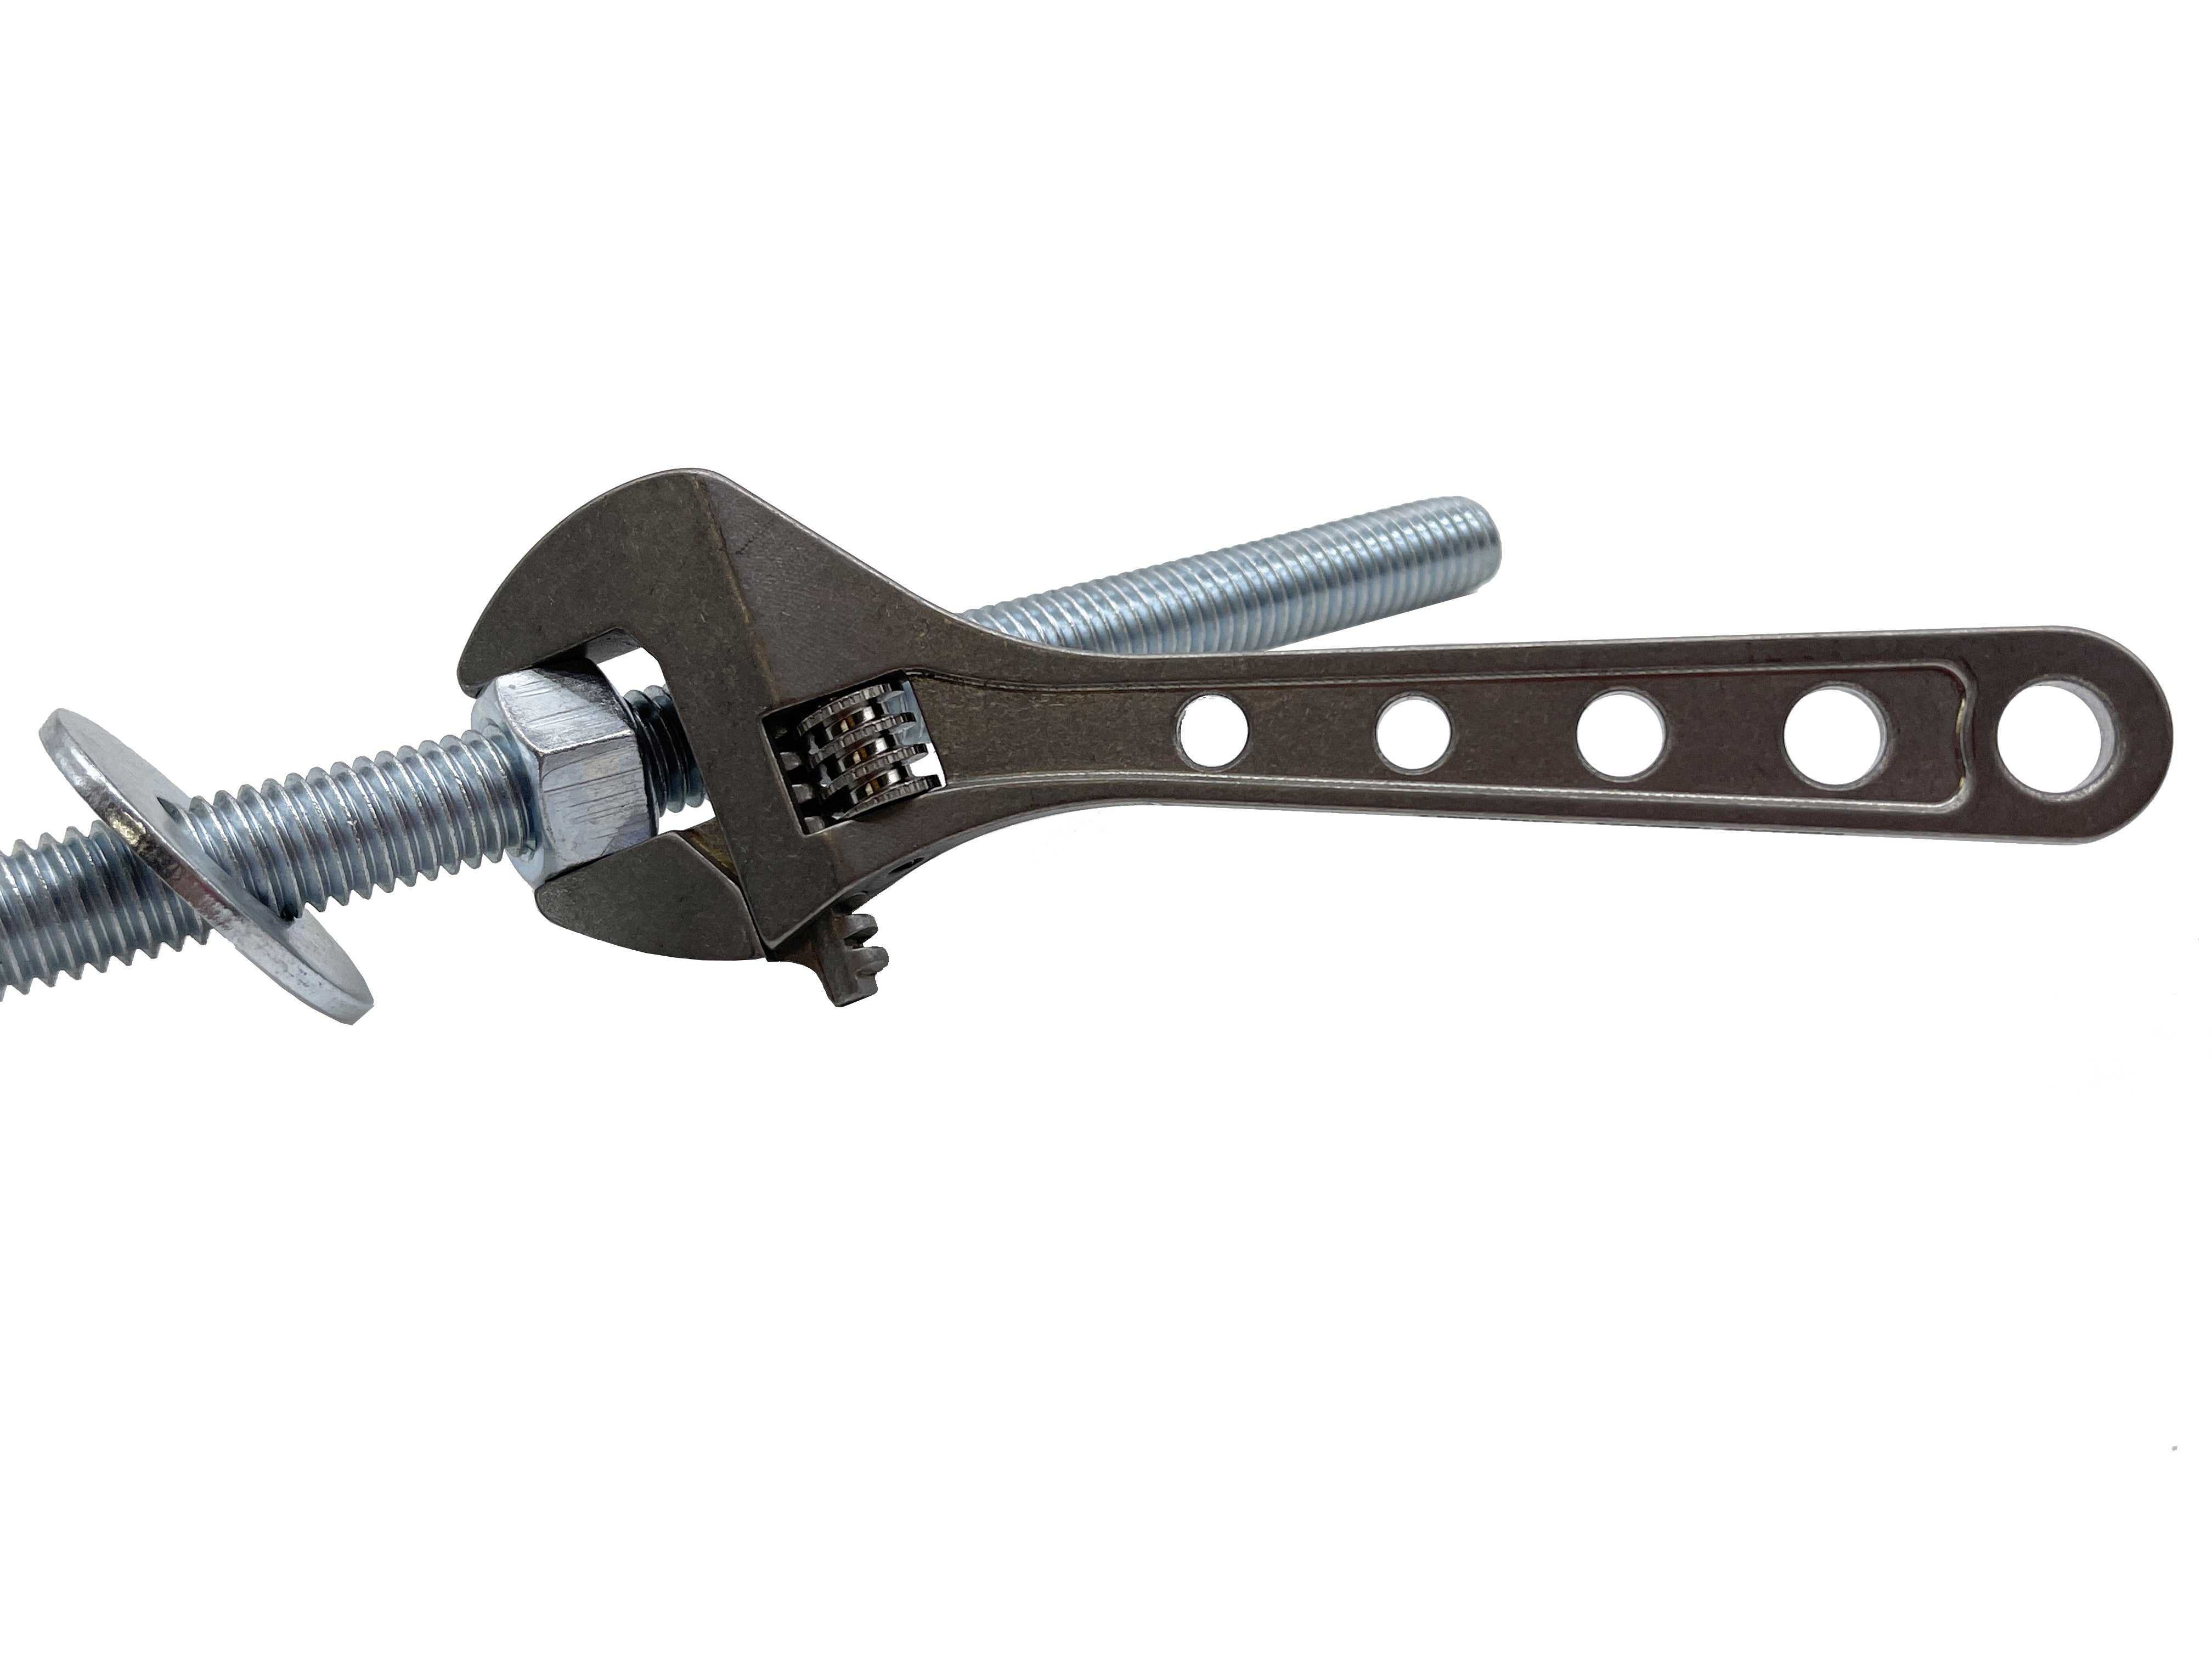 6 Adjustable Wrench - Cat# 83-1144-00